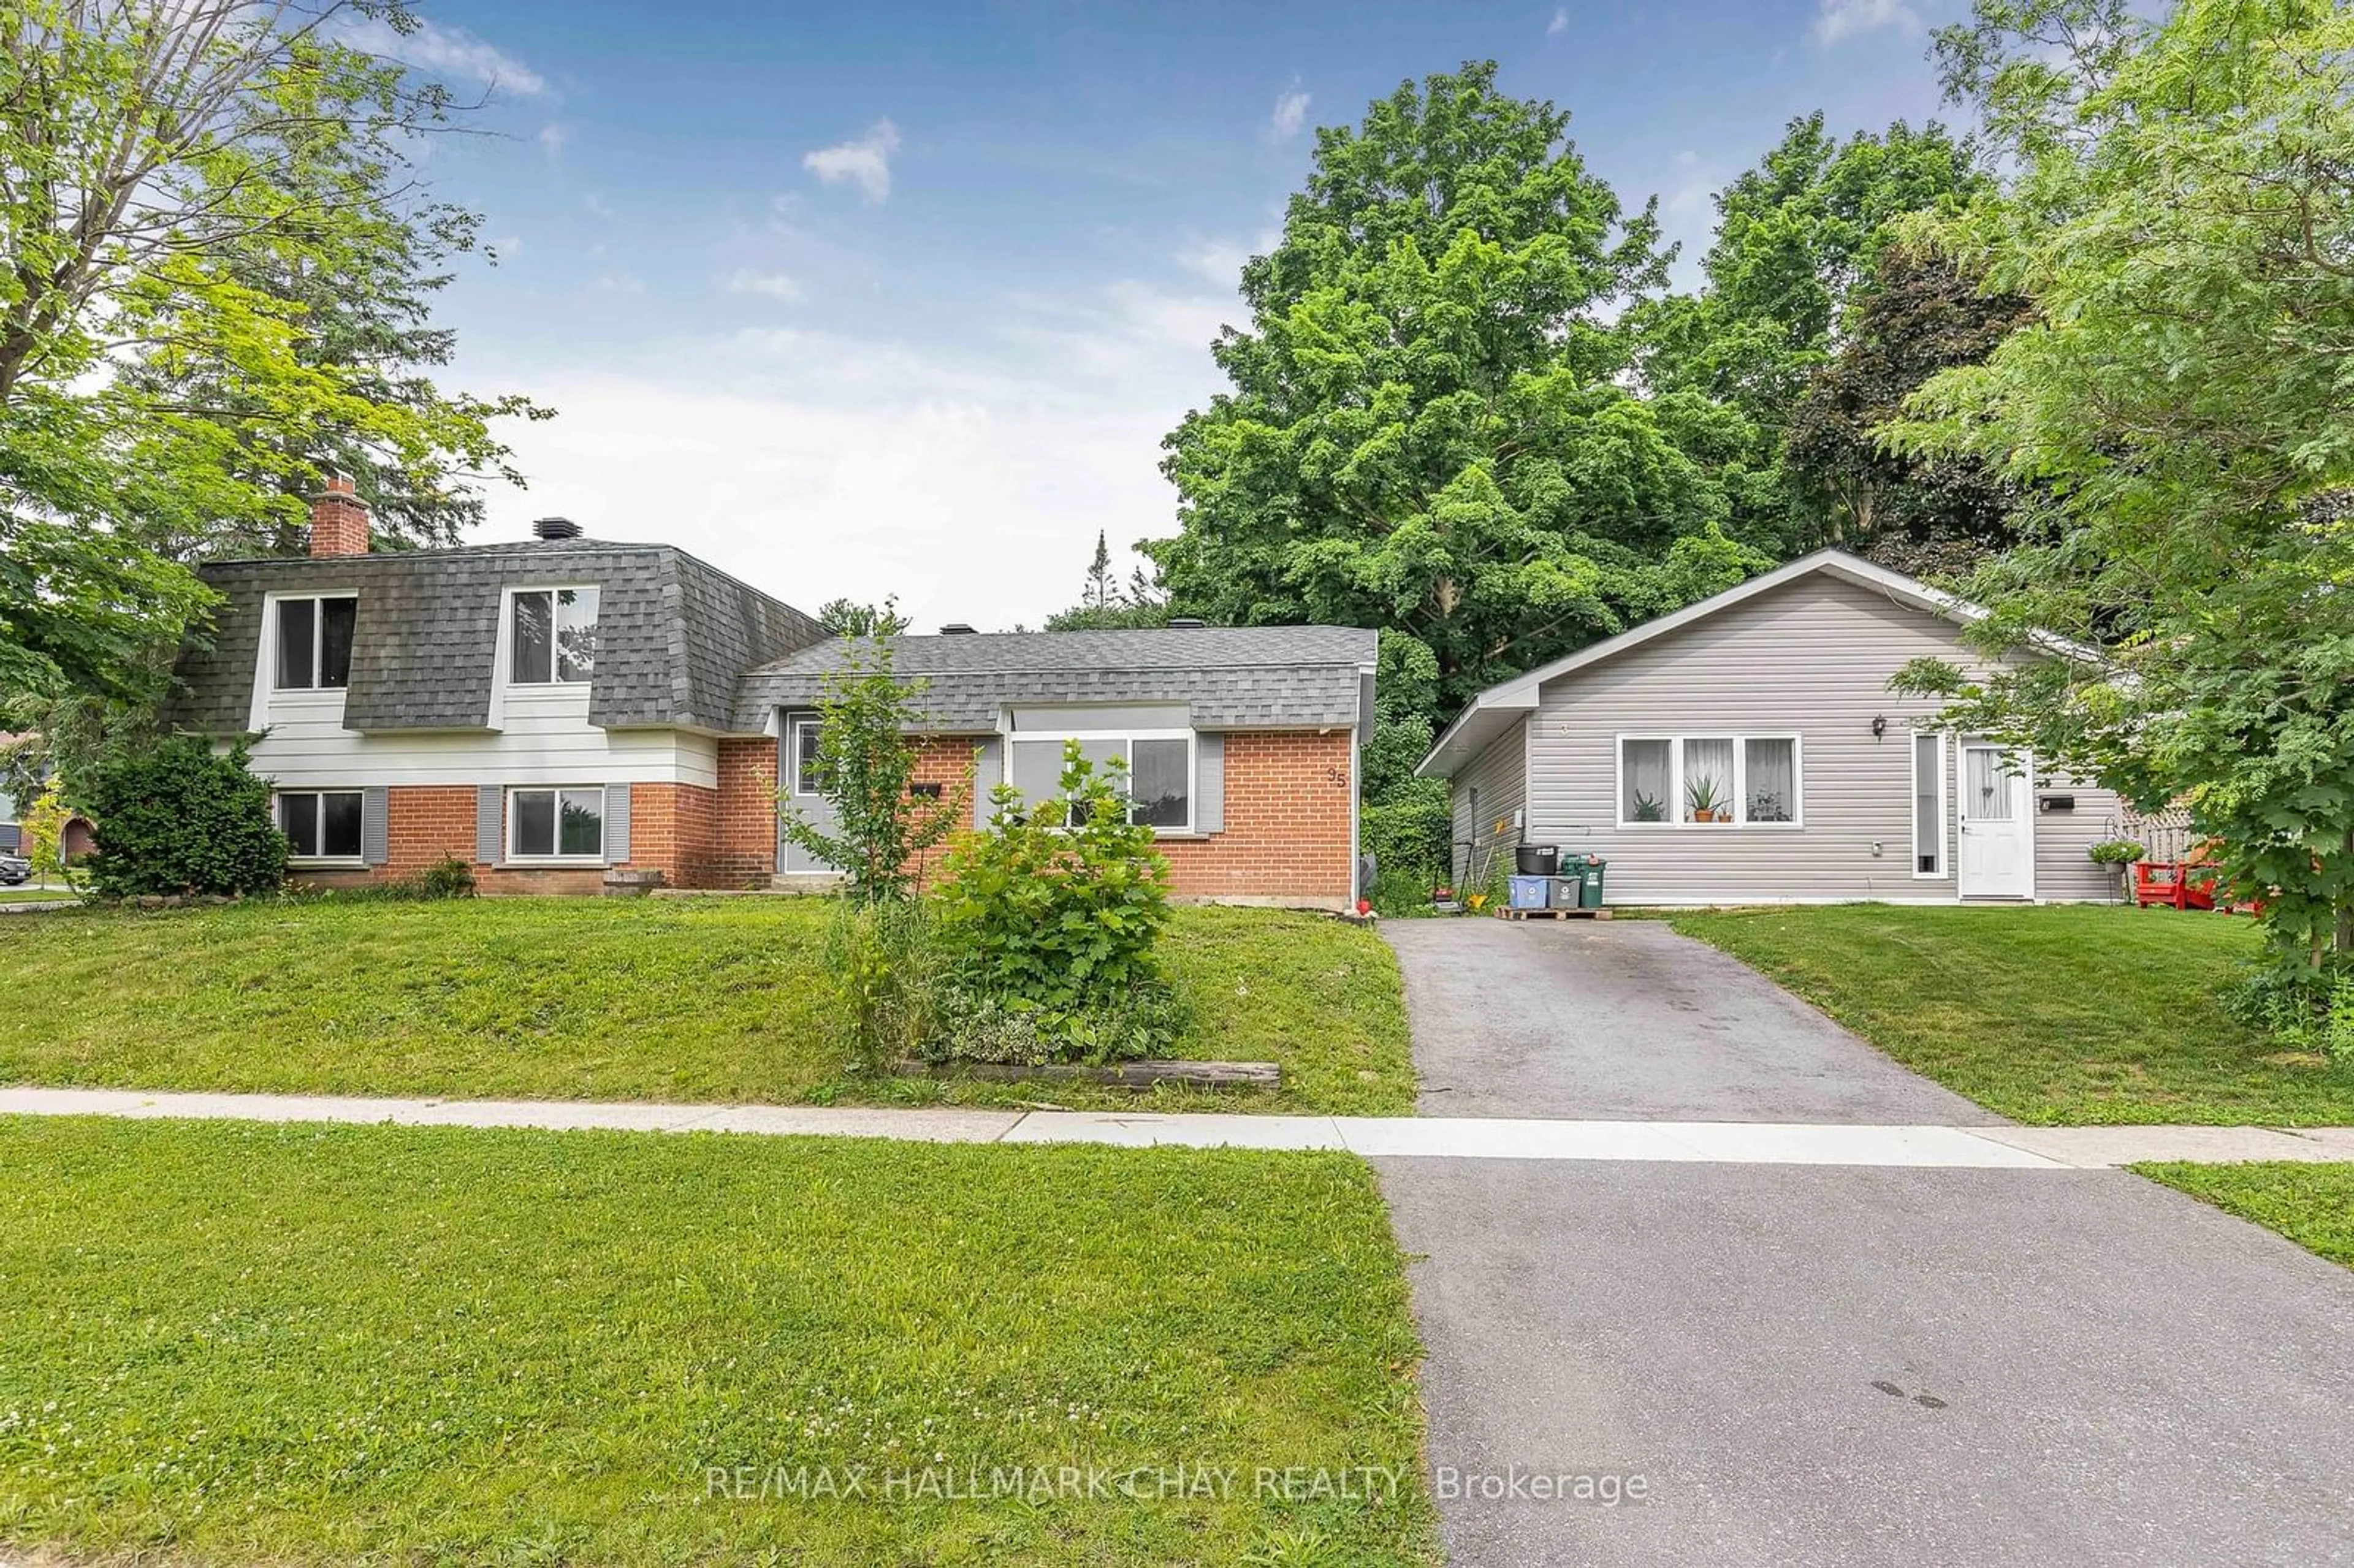 Frontside or backside of a home for 95 Farmingdale Cres #1, 2, 3, Barrie Ontario L4M 5E6